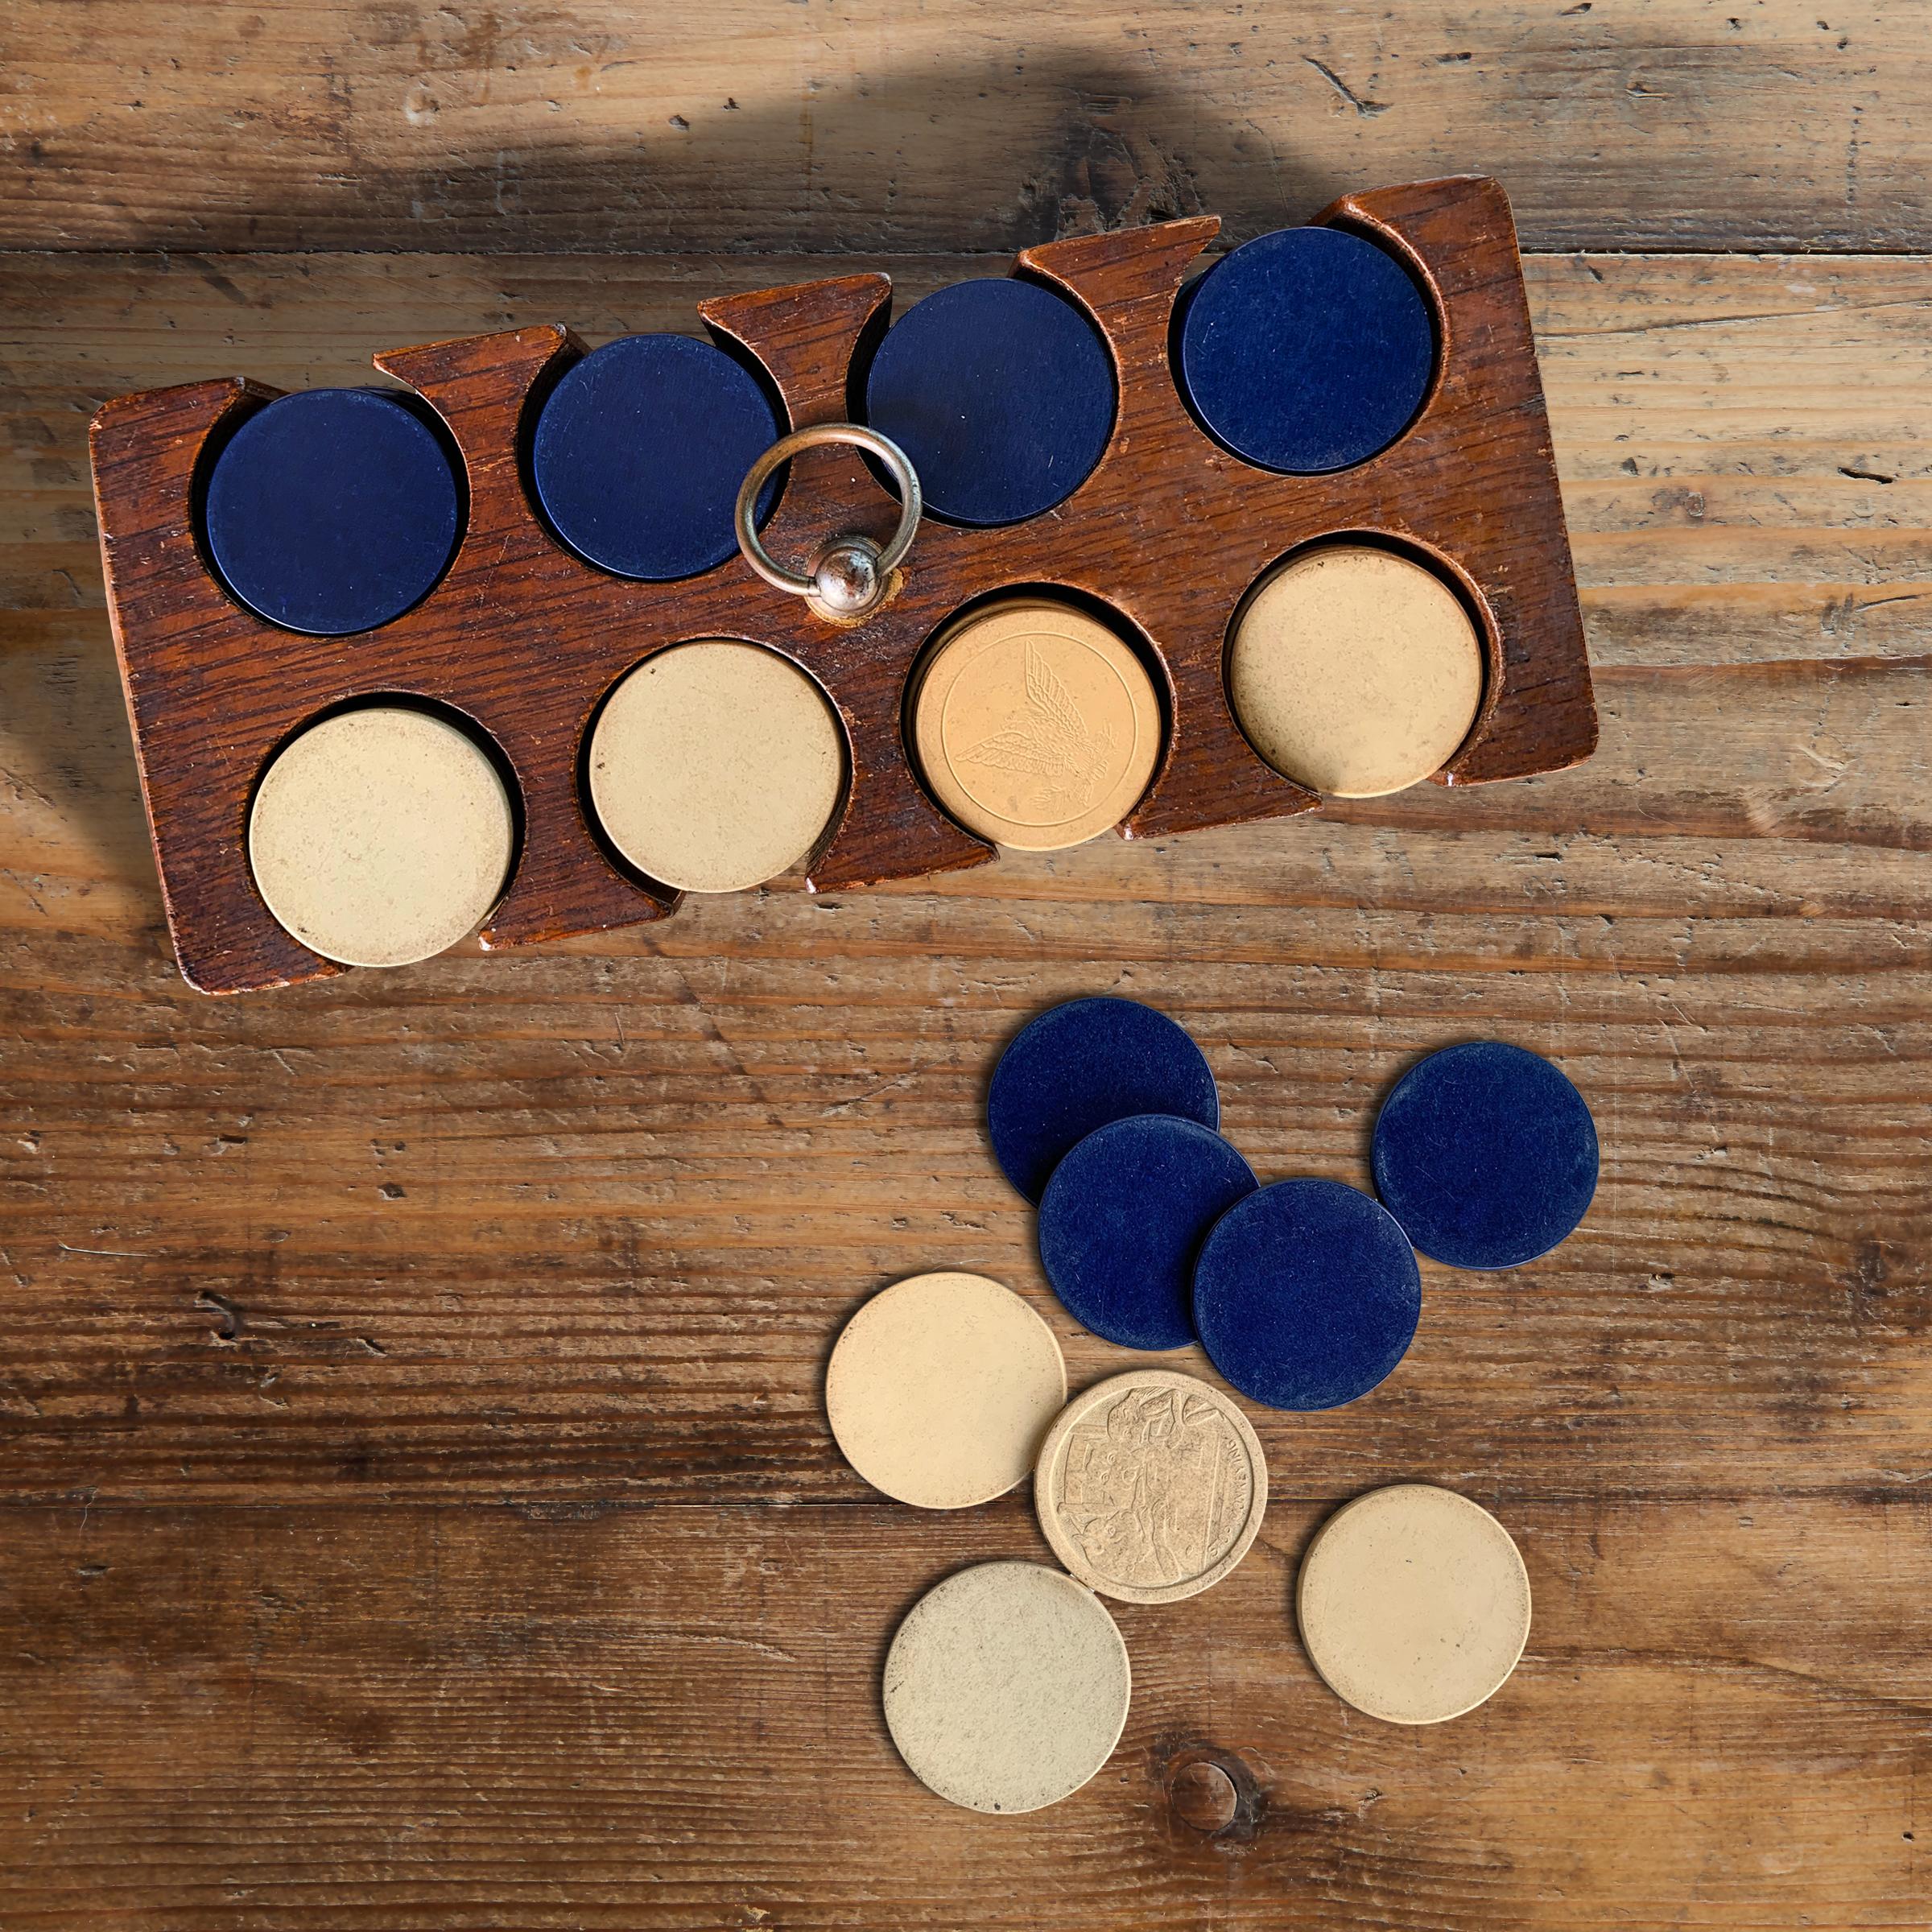 Ante up! A fun and playful set of vintage American clay poker chips, white and blue, with several being stamped with dogs playing poker, and other whimsical images. Chips are housed in an oak caddy with a brass ring pull. There are 108 chips of each